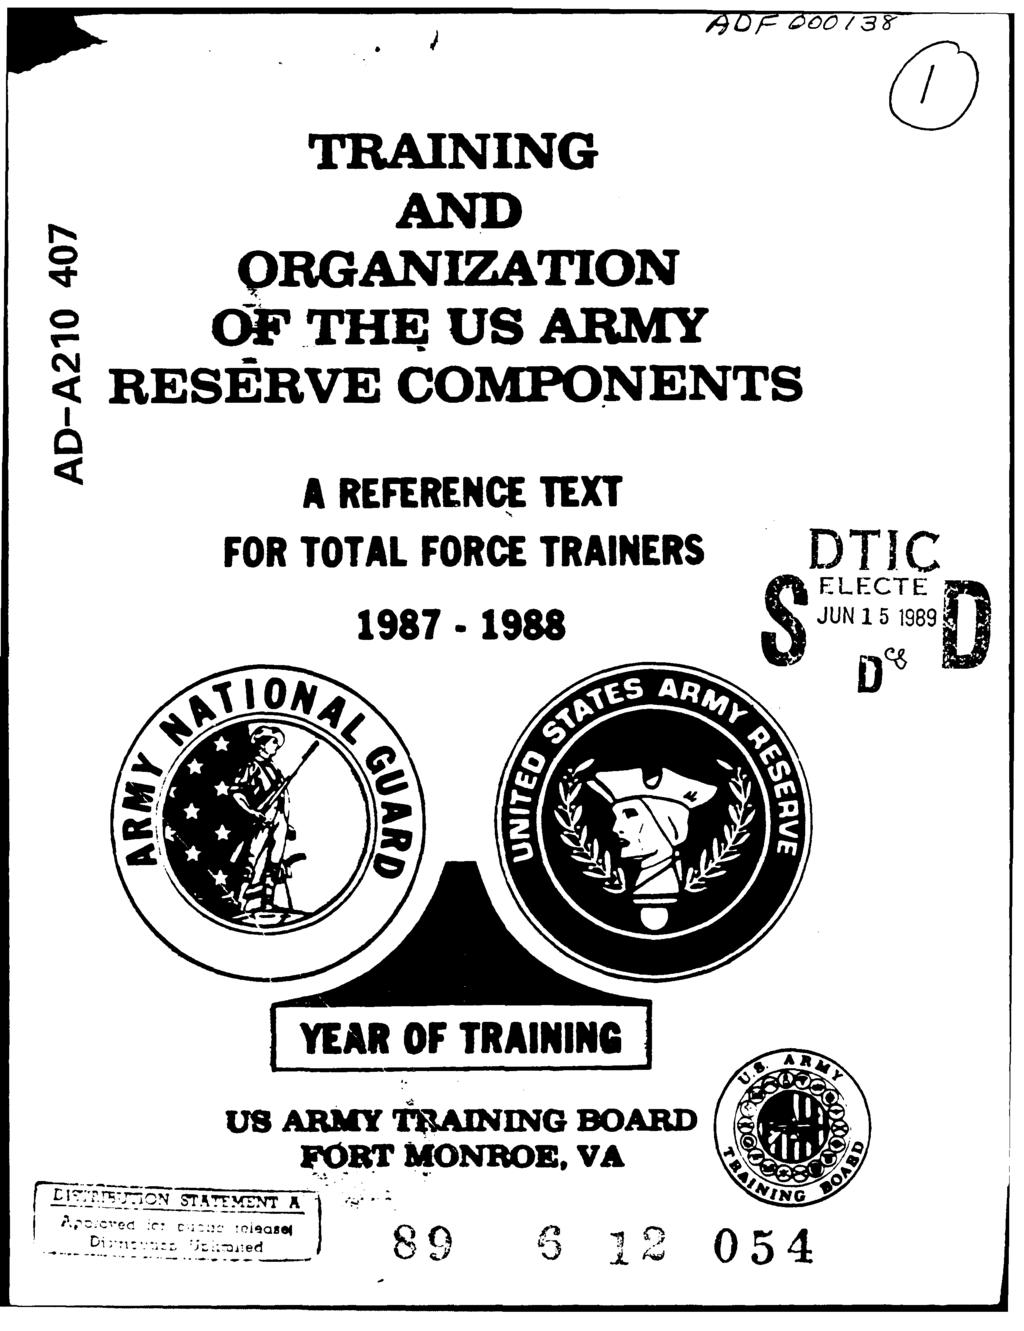 TRAINING AND eorganization SOF THE US ARMY SRESERVE COMPONENTS (: A REFERENCE TEXT FOR TOTAL FORCE